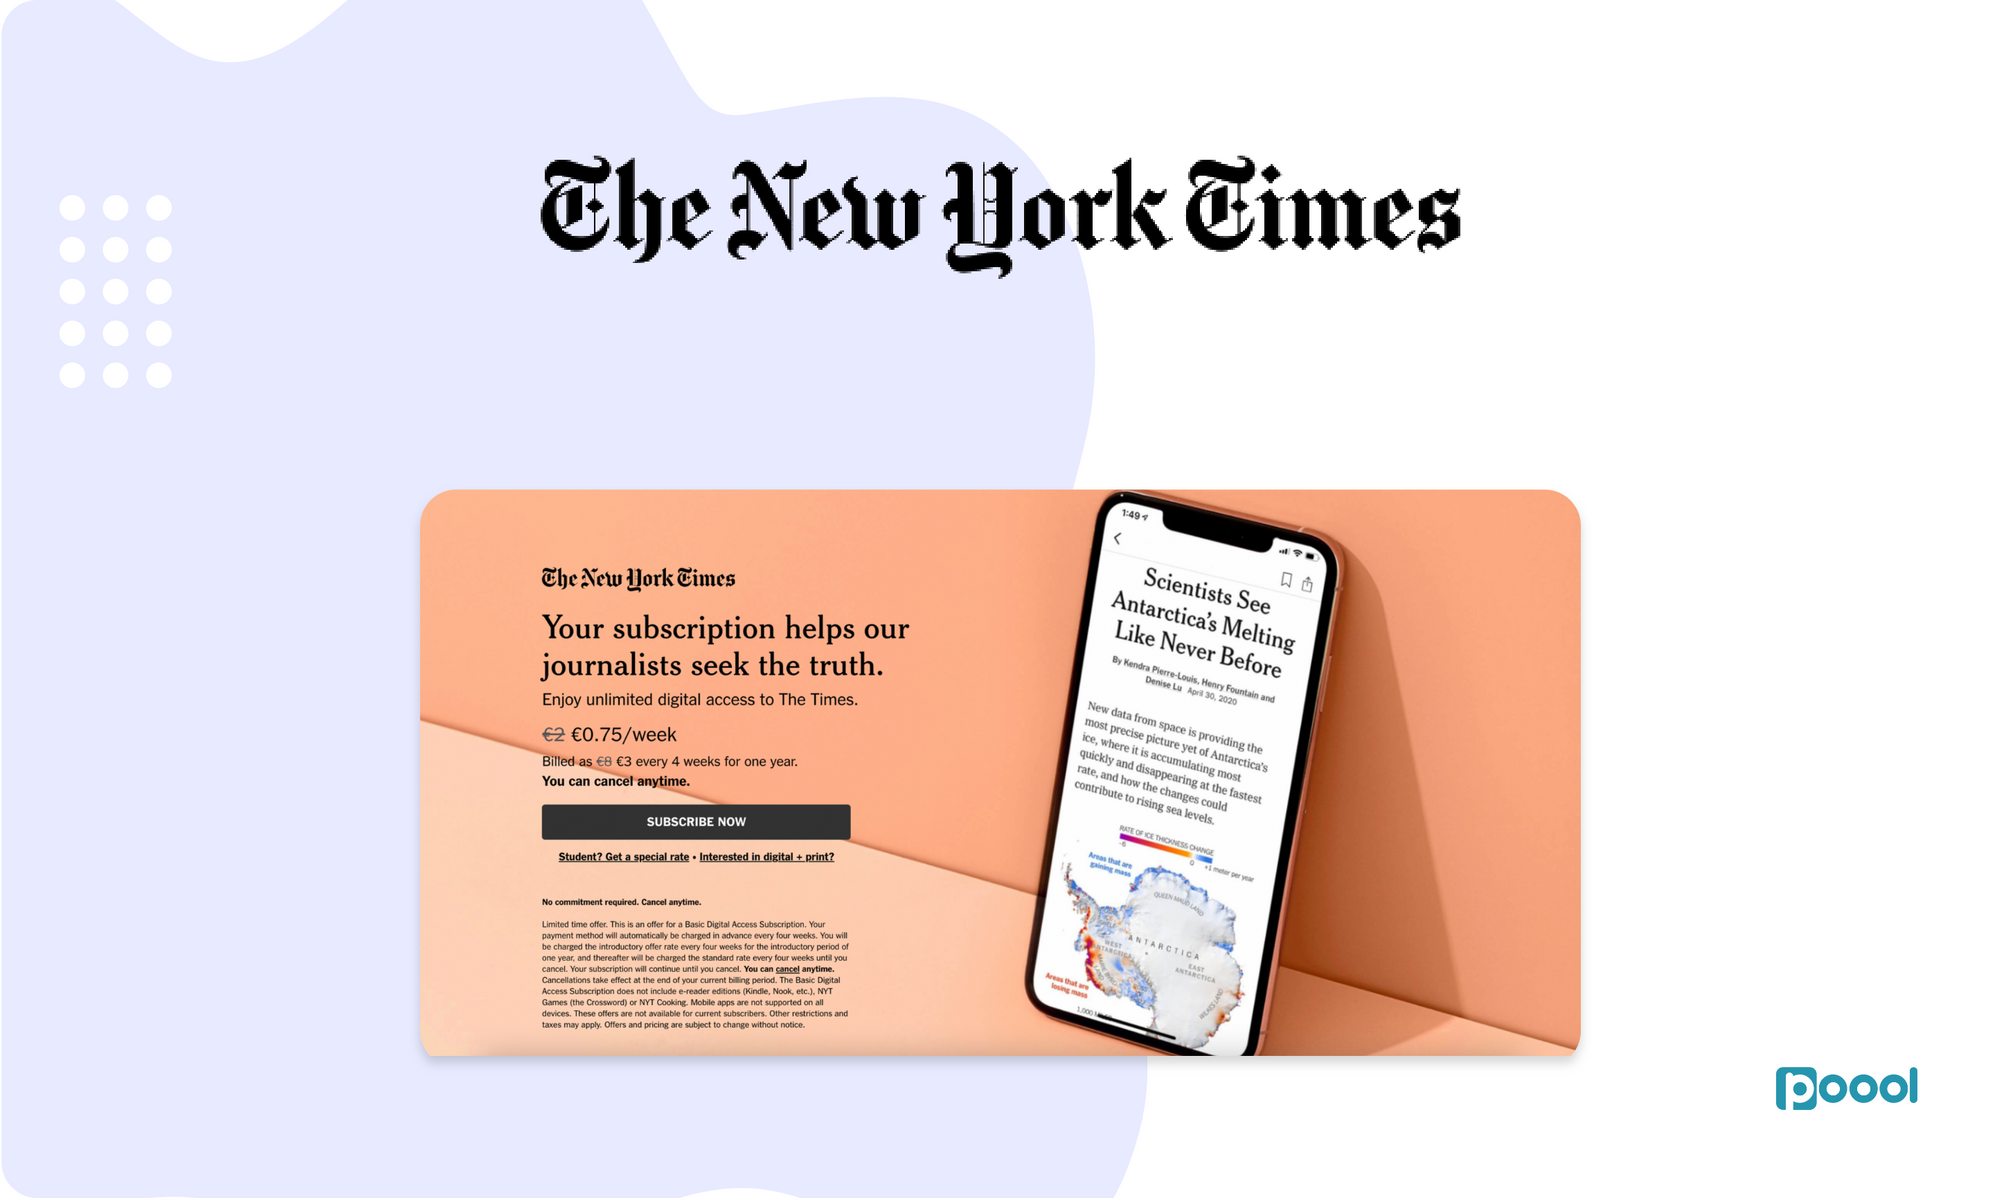 The New York Times Registration Wall: From Content, to Registration to Content | Series.